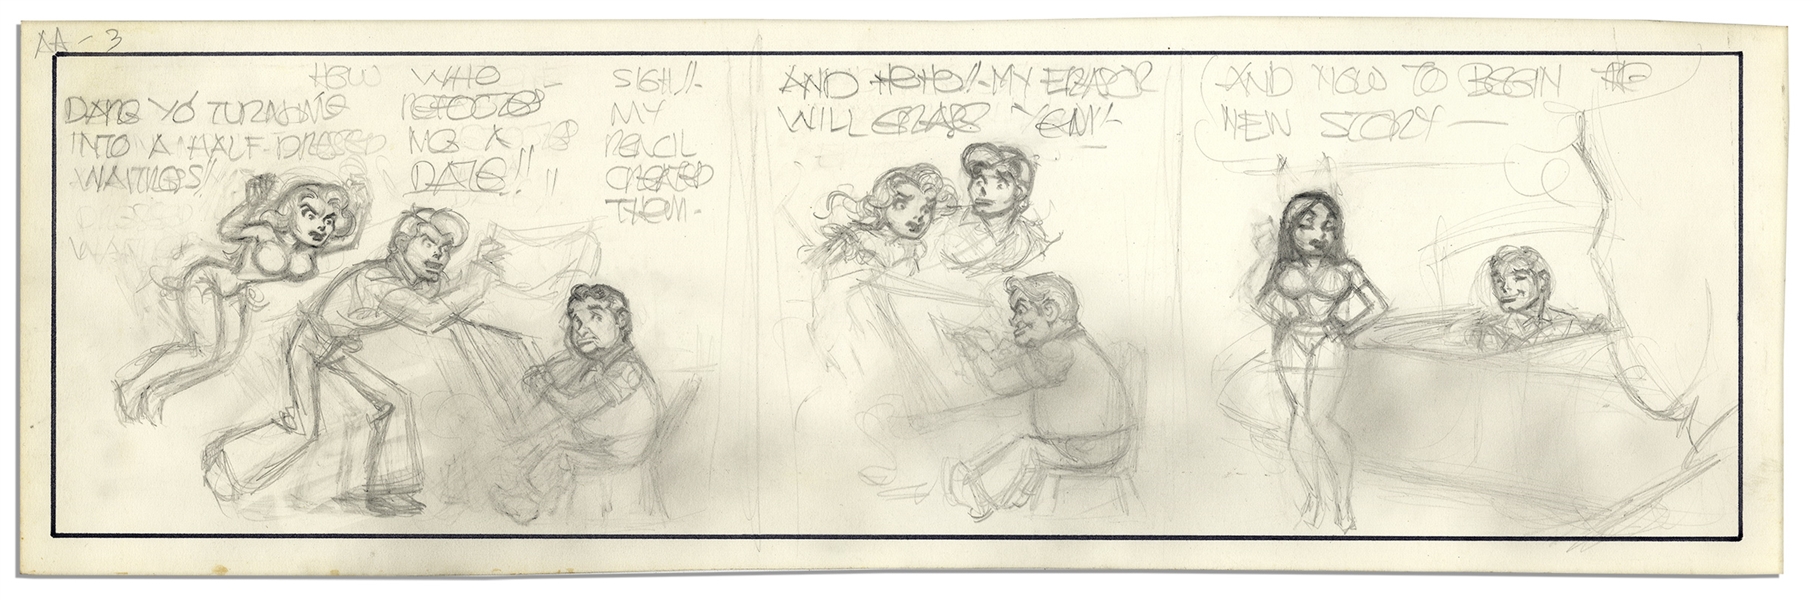 ''Li'l Abner'' Unfinished Comic by Al Capp in Pencil -- Undated & Untitled Strip With Li'l Abner, Daisy Mae & a Self-Sketch of Capp -- 19.75'' x 6.25'' -- Very Good -- From Al Capp Estate